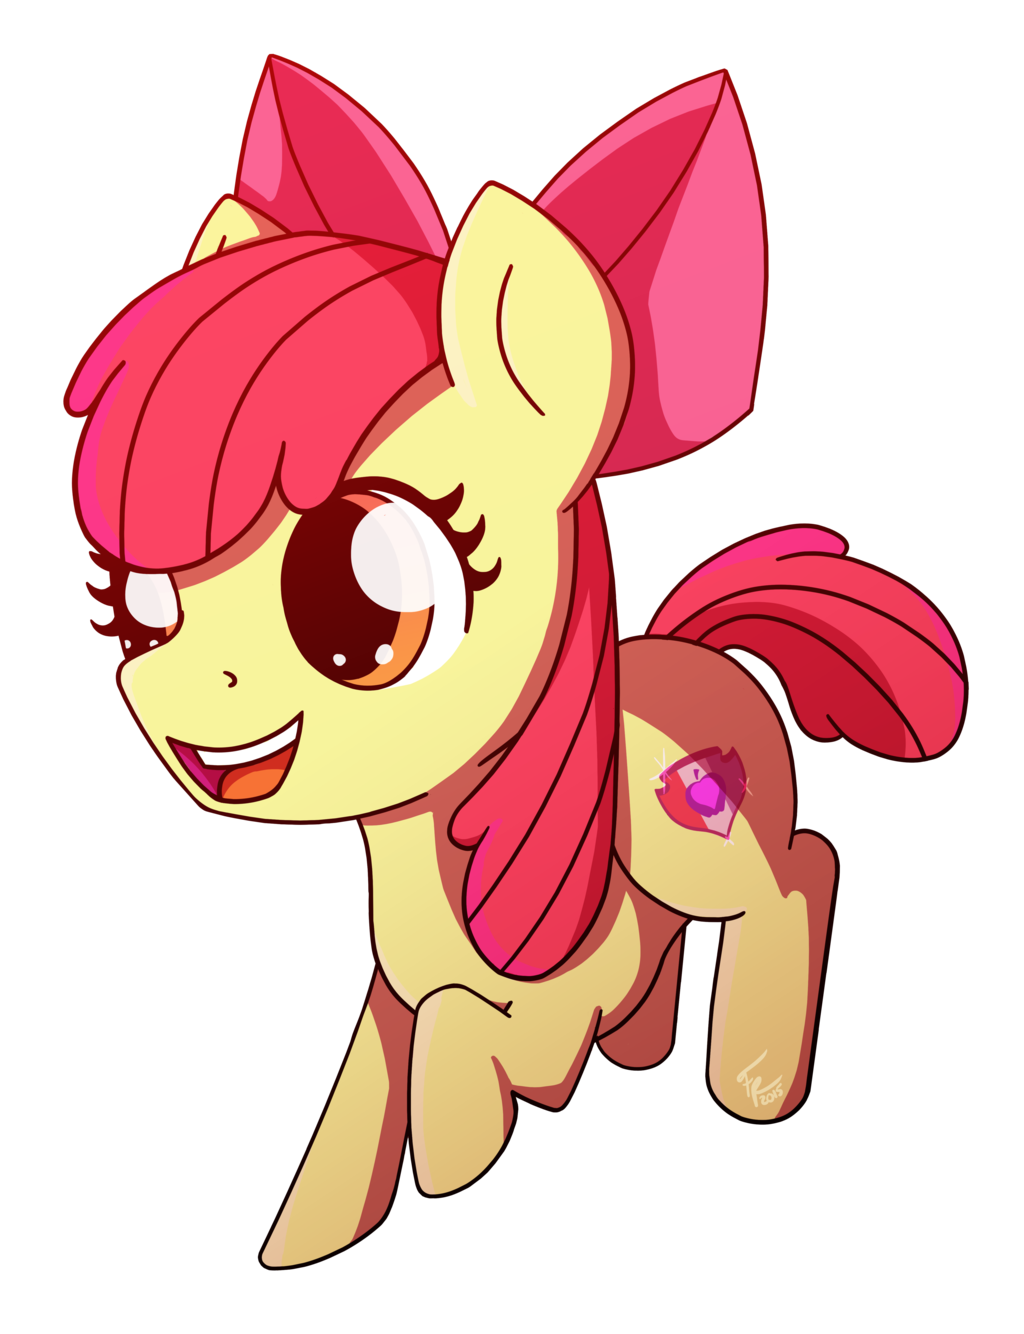 chibi_apple_bloom_by_foreverroseify-d9cq